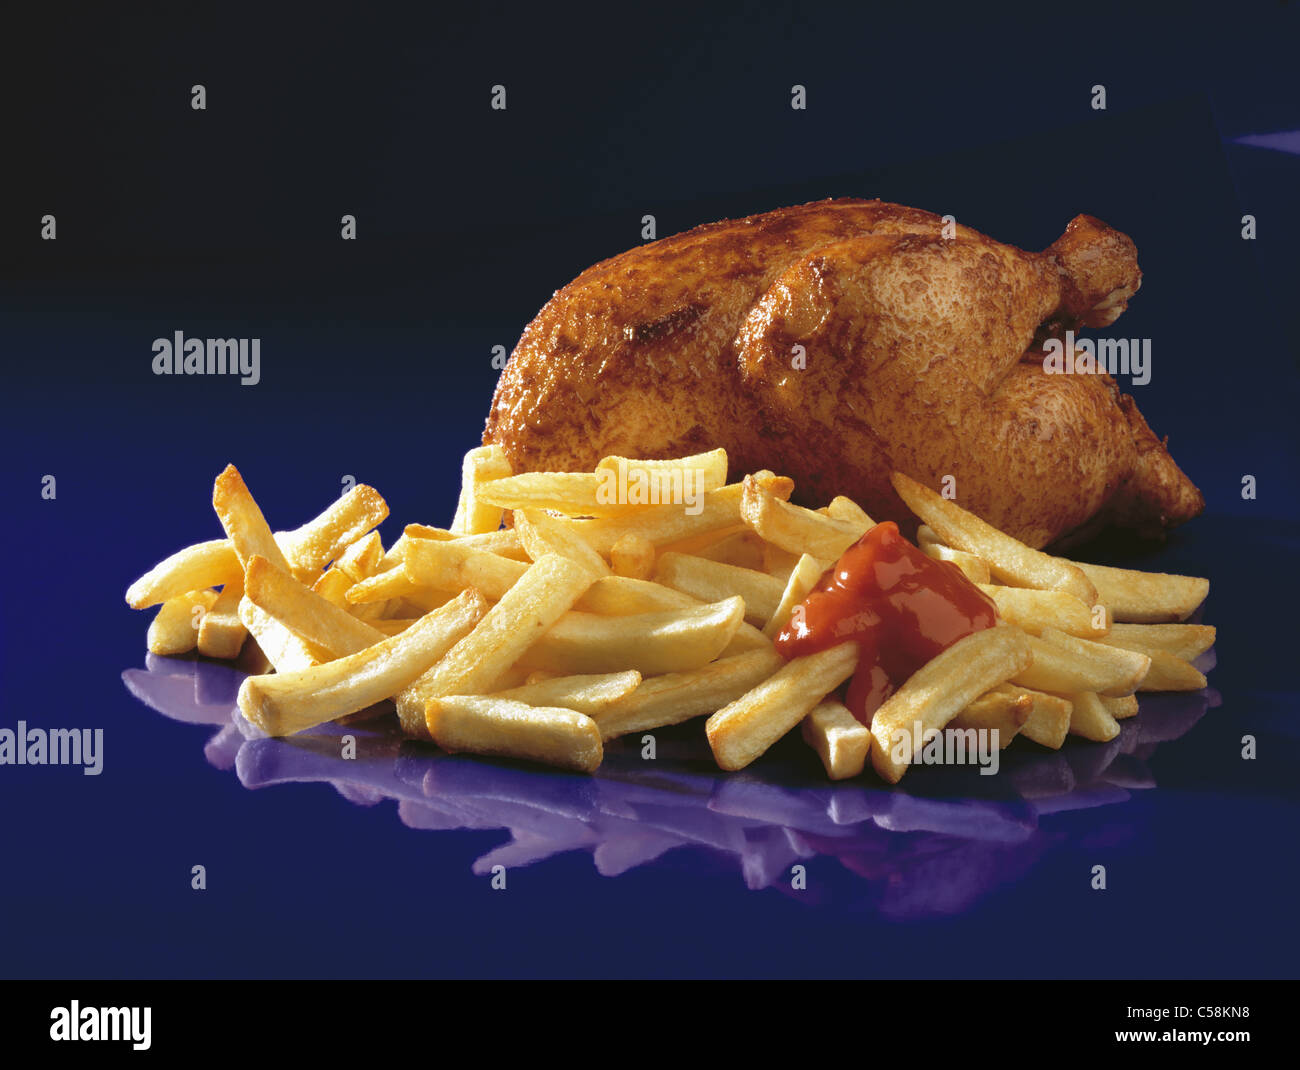 Cut out: Fried chicken and french fries with ketchup Stock Photo